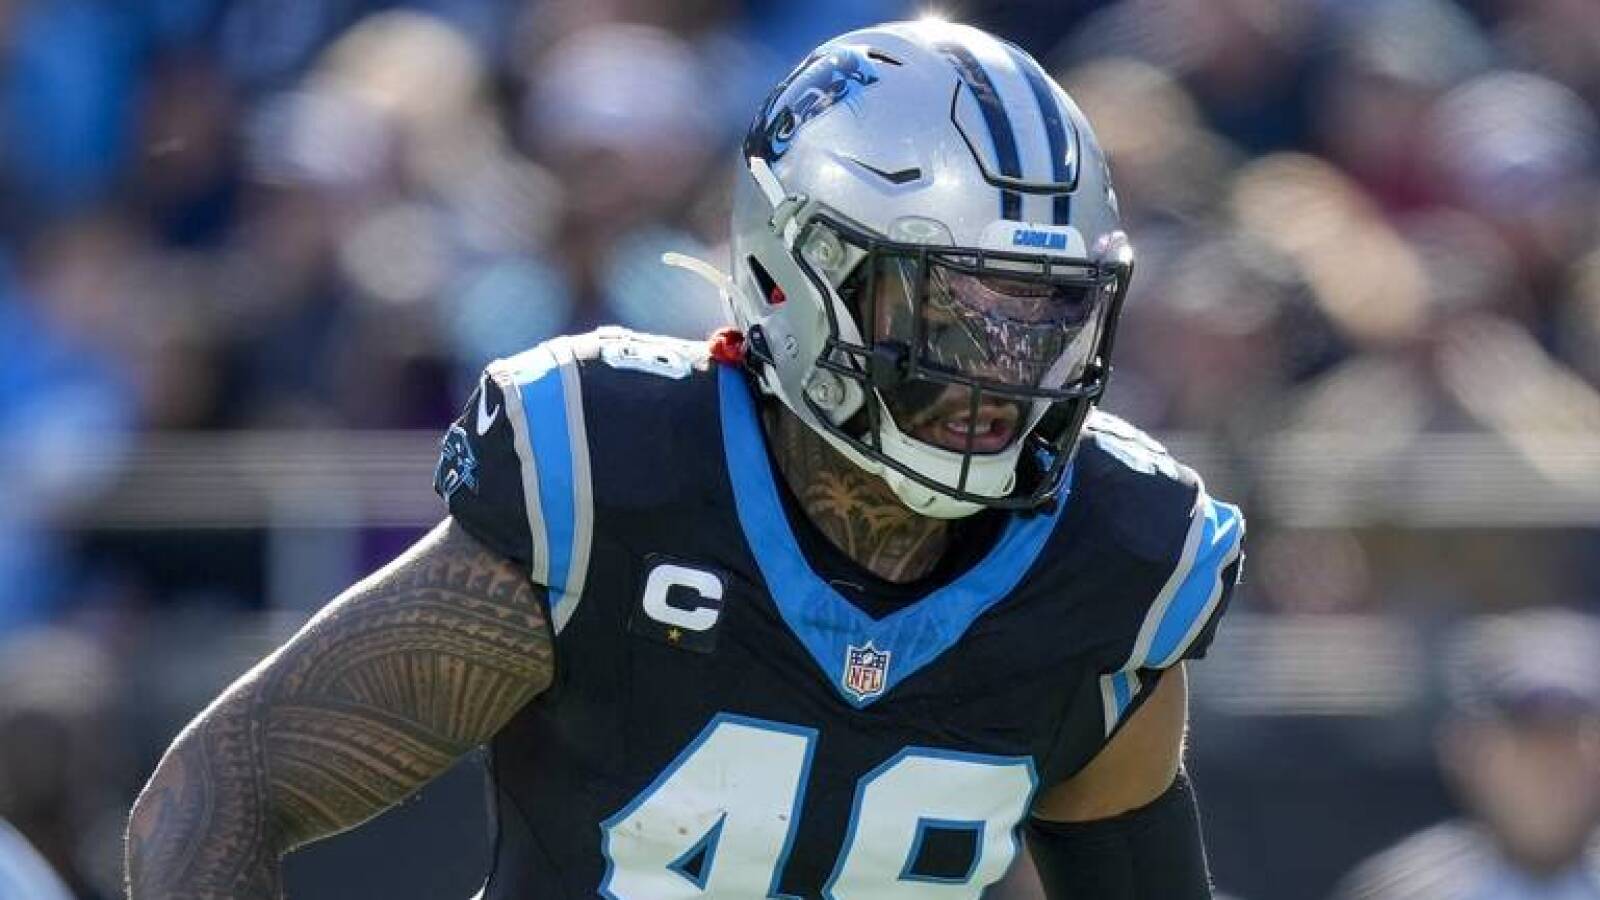 Panthers linebacker Luvu poised for a lucrative multi-year deal after stellar performance in pass rush